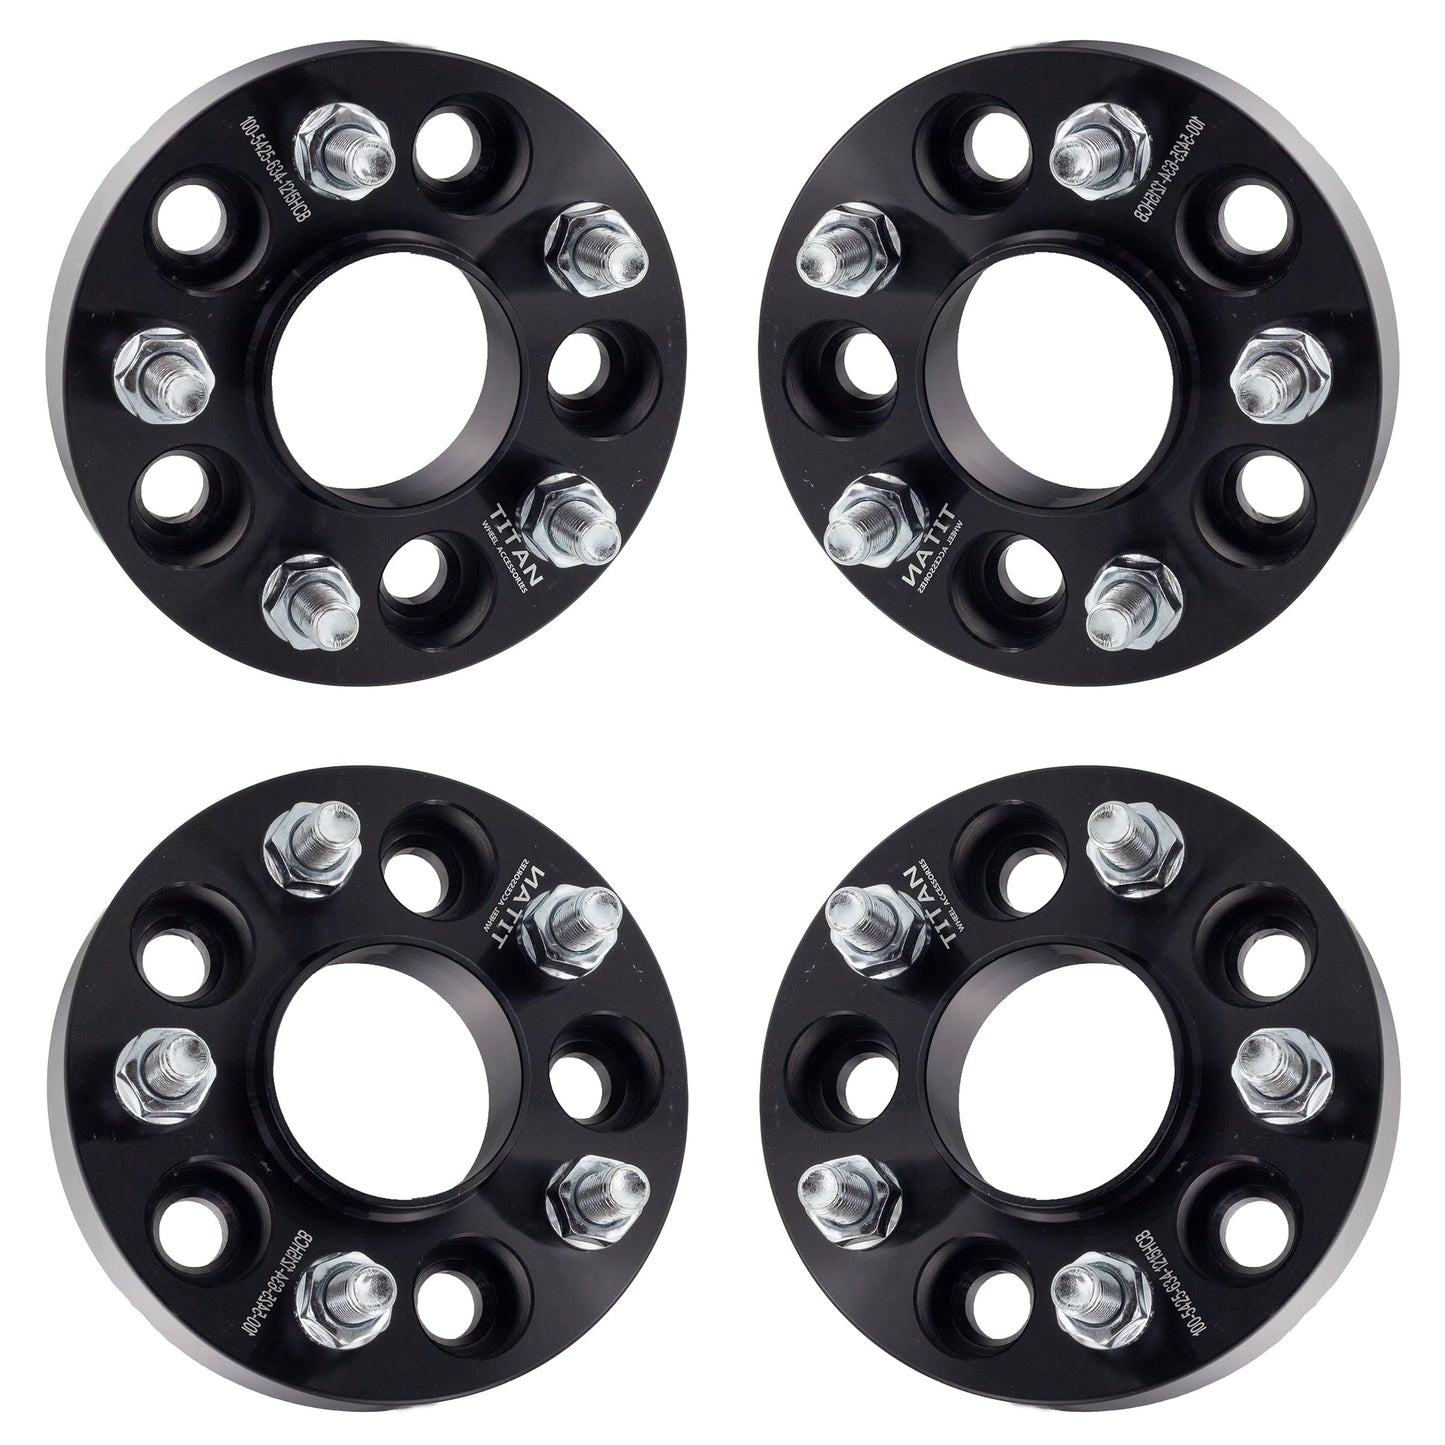 1" (25mm) Titan Wheel Spacers for Volvo C30 C70 S40 V50 | 5x4.25 (5x108) | 63.4 Hubcentric | 12x1.5 Studs |  Set of 4